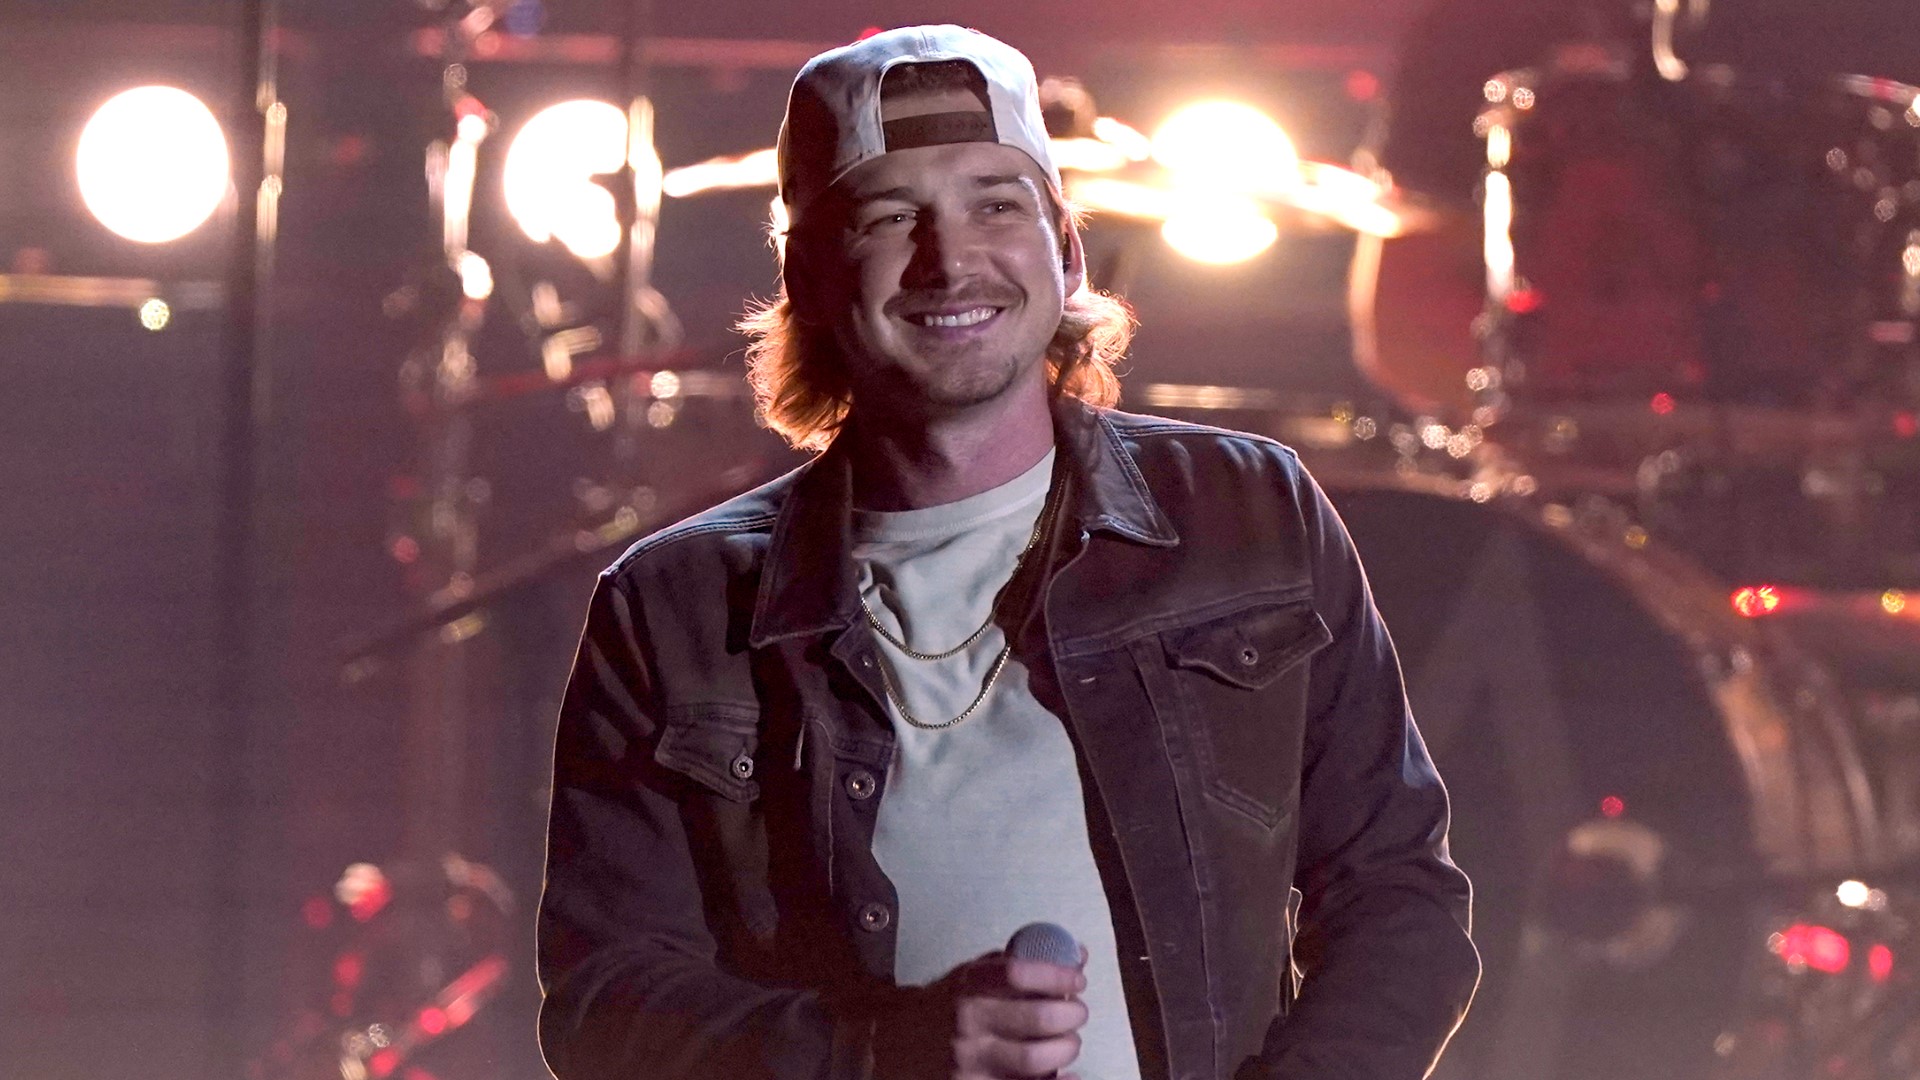 Country singer-songwriter Morgan Wallen is coming to St. Louis next summer as part of his "One Night At A Time World Tour."